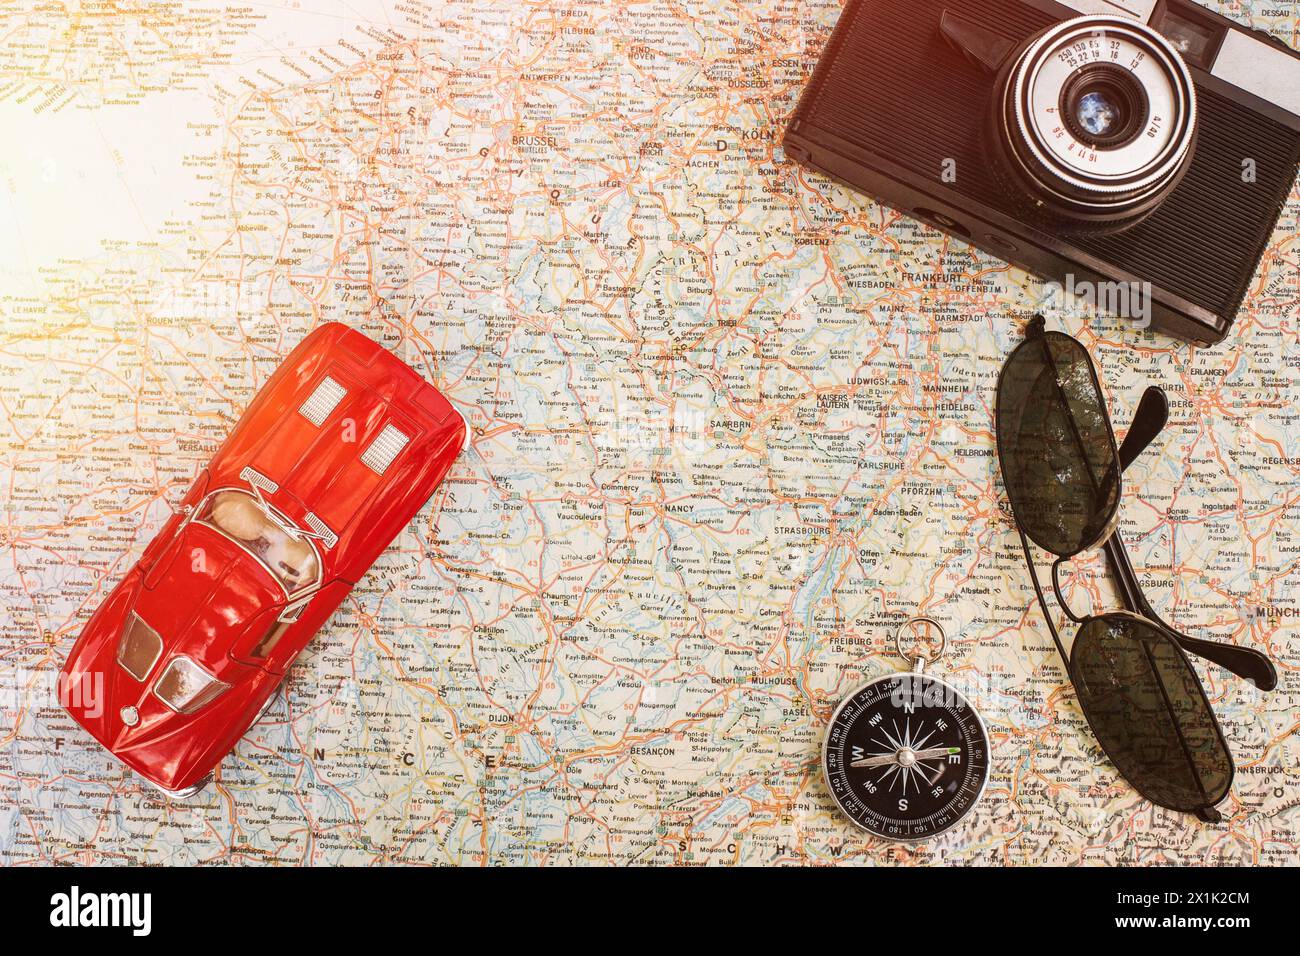 Traveling by car. Vintage red toy car, camera, compass and sunglasses lying on the map Stock Photo